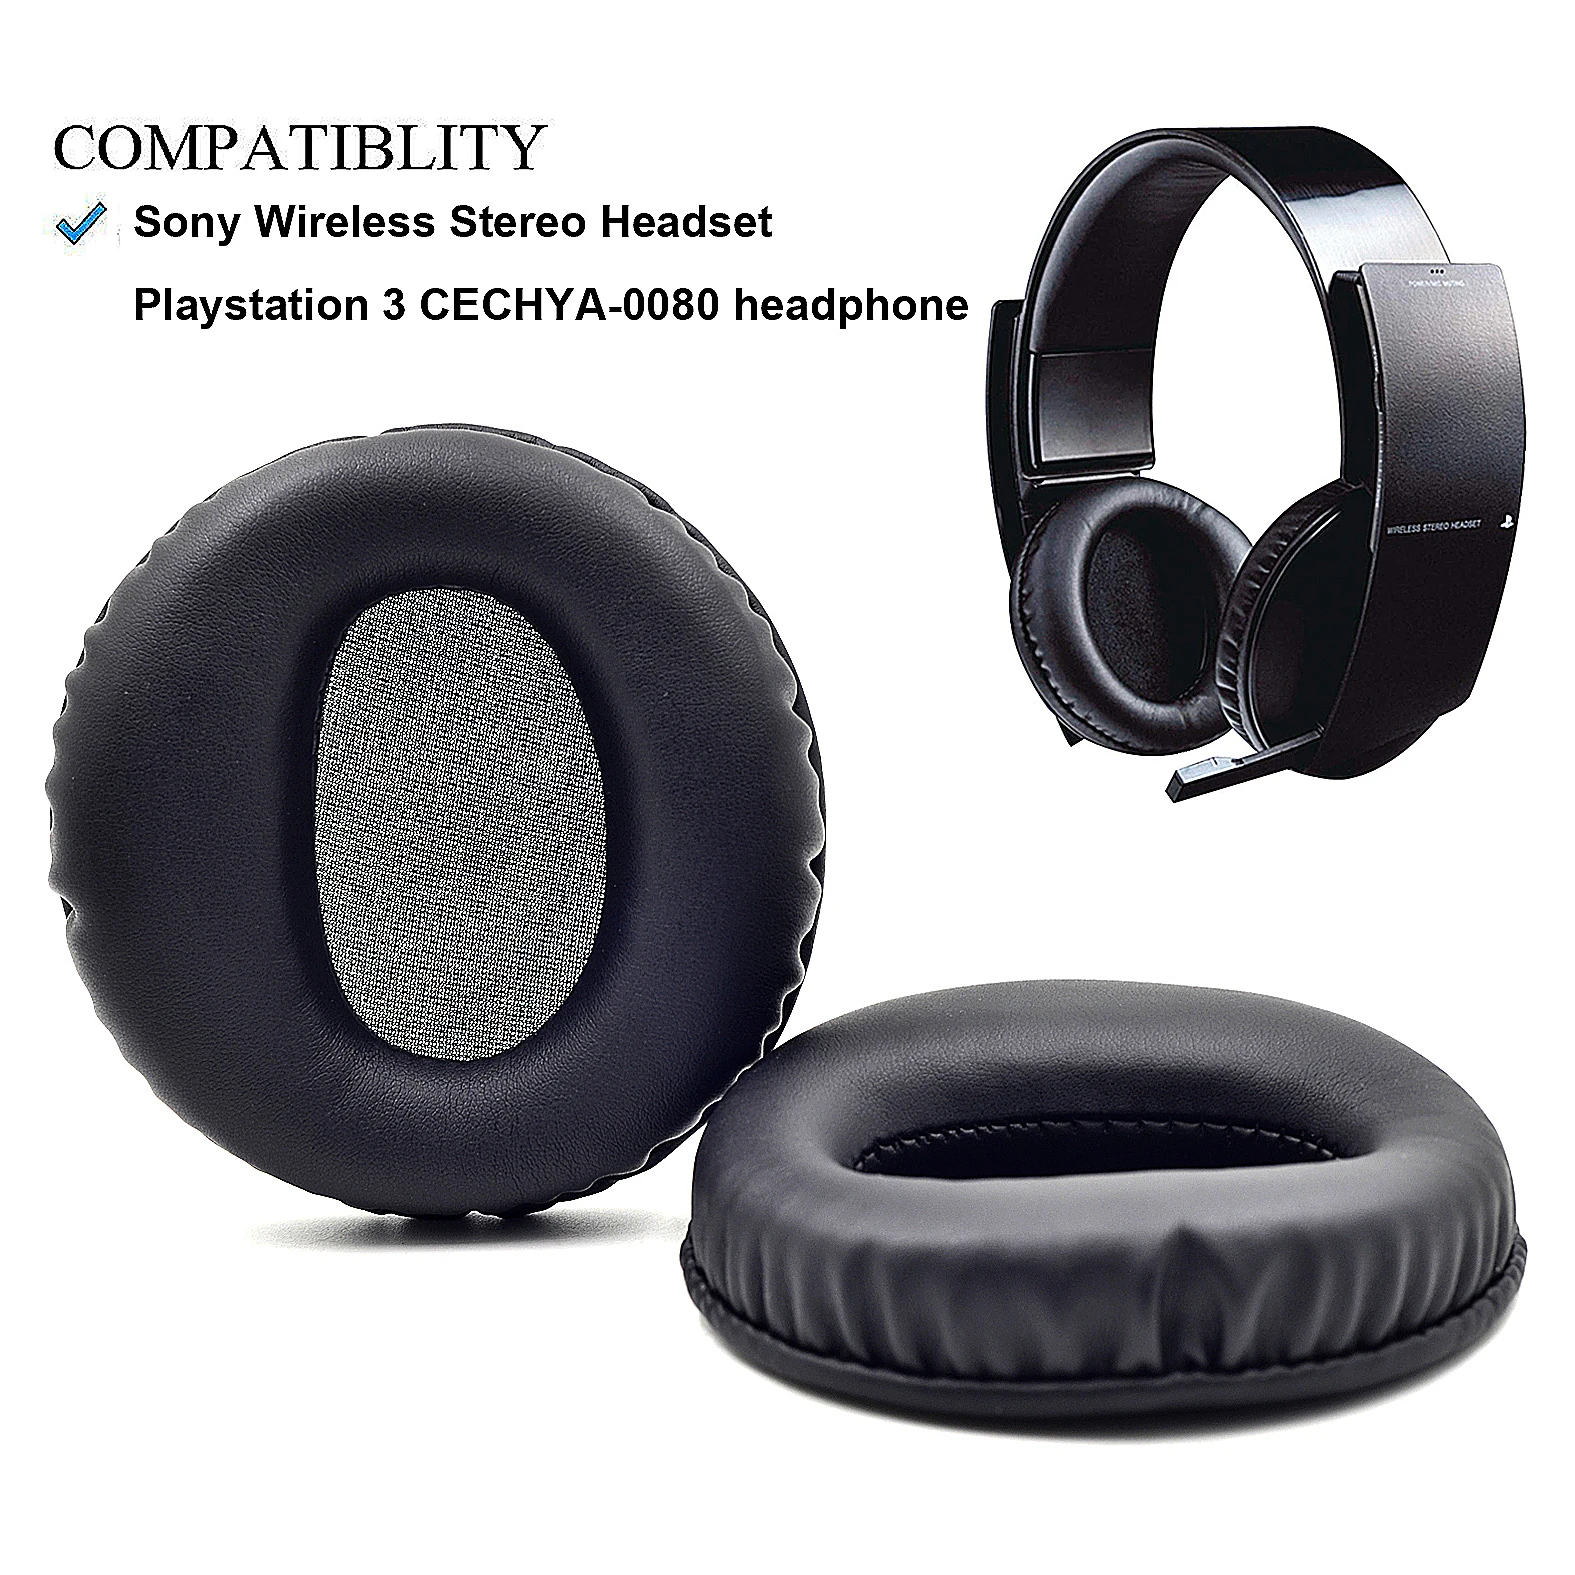 terrorisme Verblinding archief Defean Replacement PU Earpads Headband Ear pads for SONY PS3 PS4 Wireless  Stereo CECHYA-0080 Headphone - AliExpress